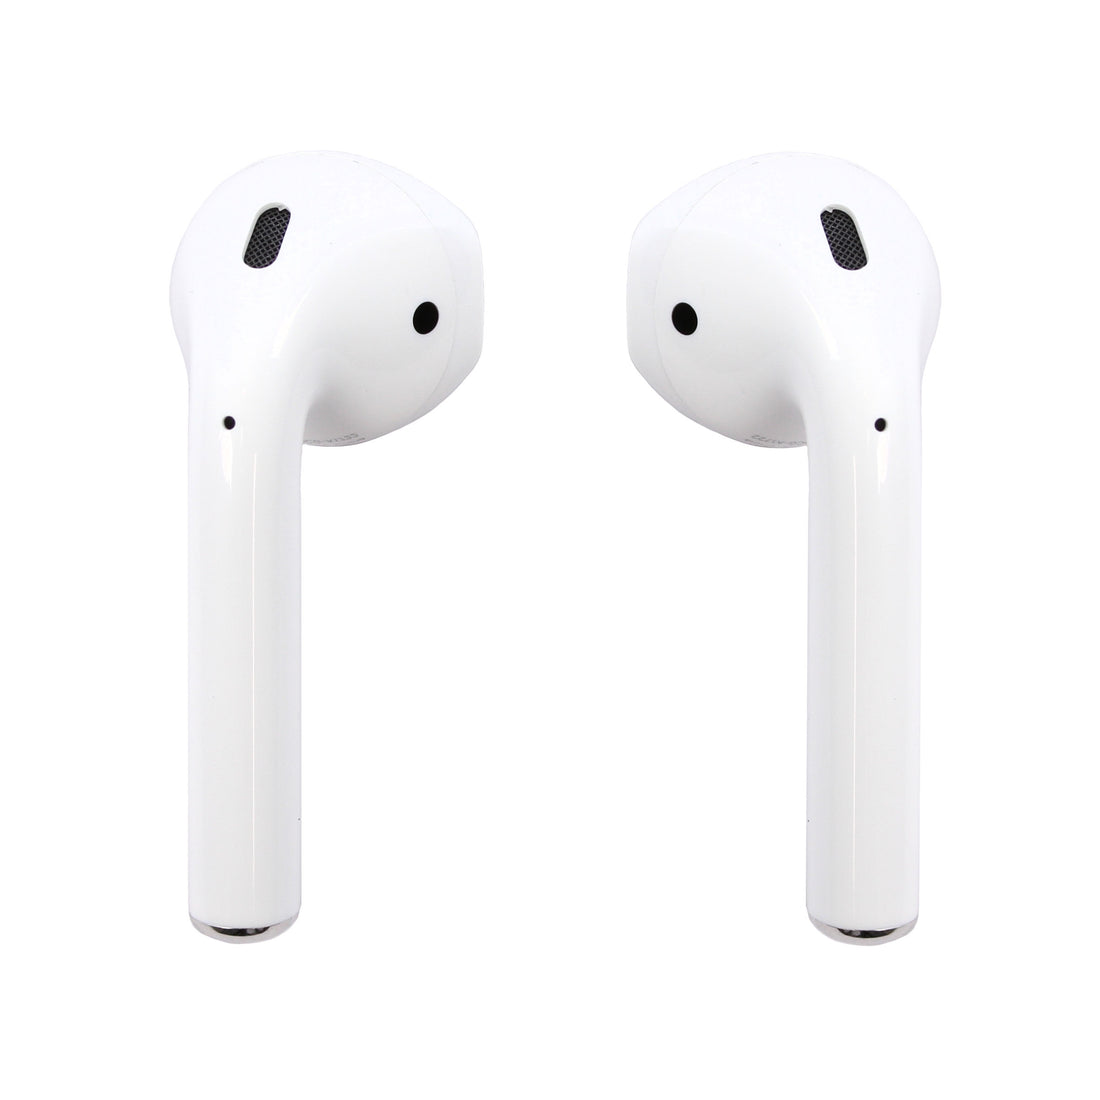 Apple AirPods 2 with Wireless Charging Case &amp; MFI Cable - White (Refurbished)